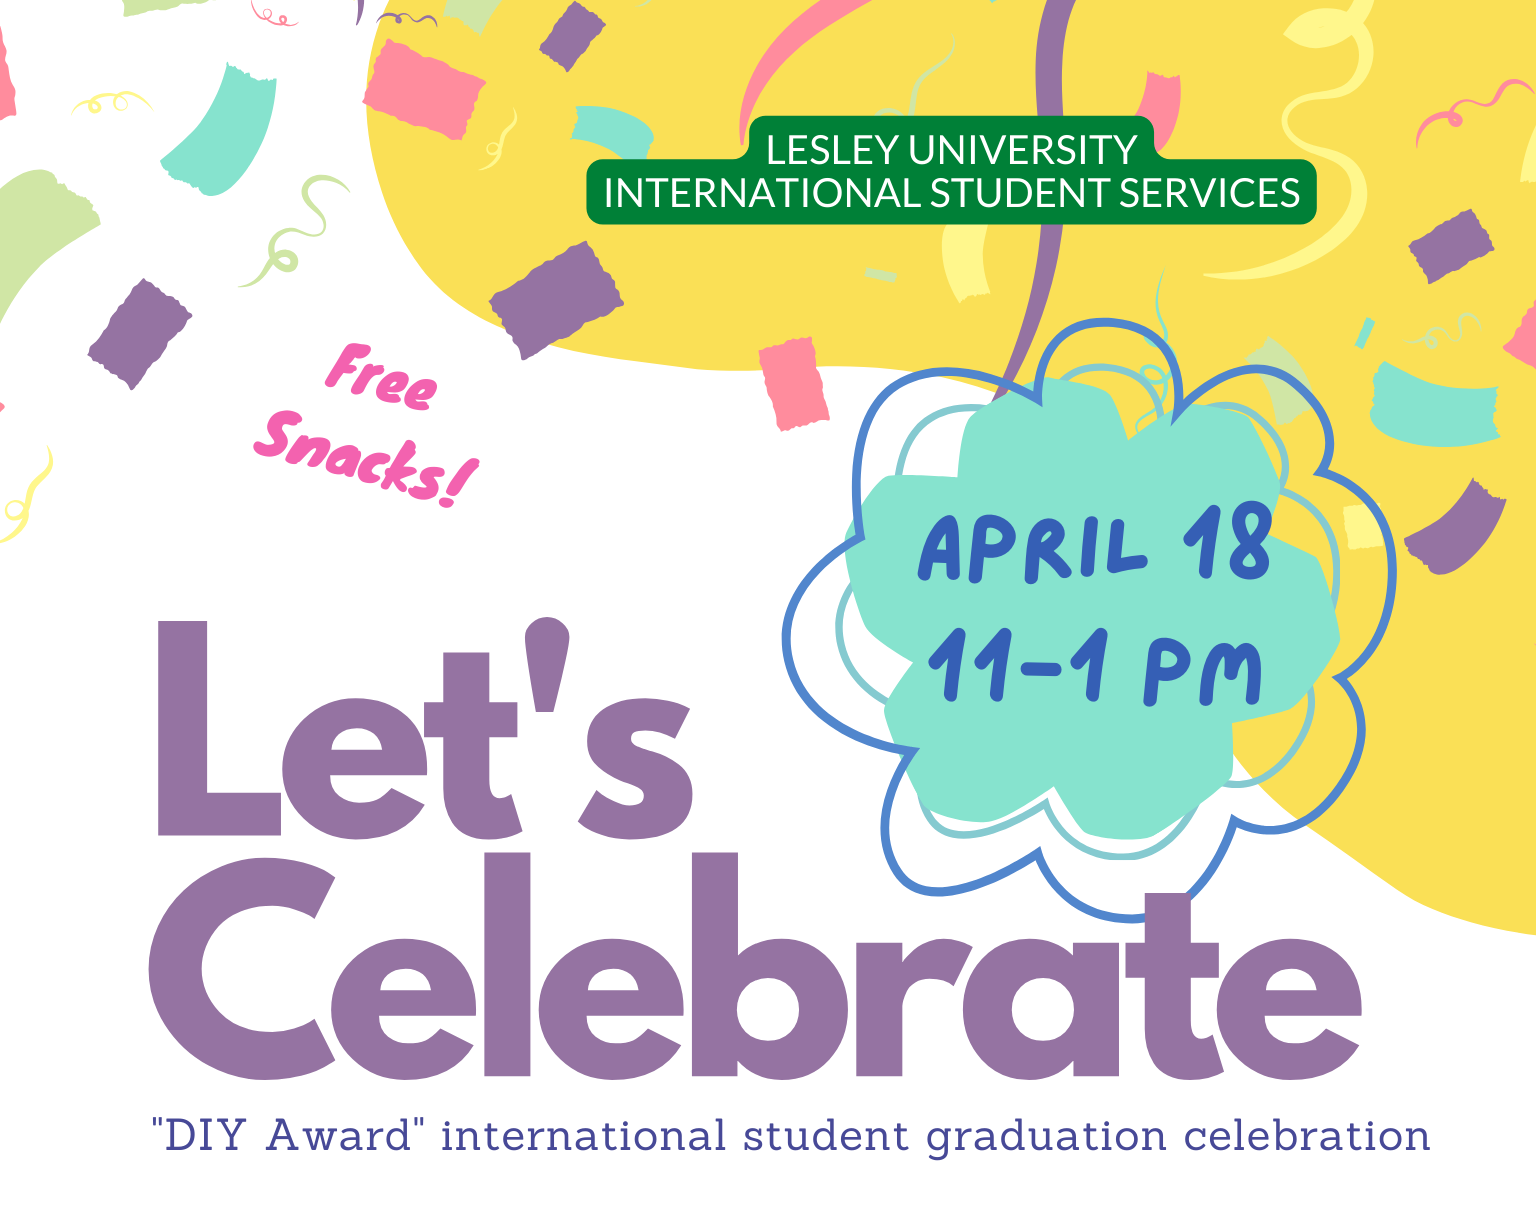 "Let's Celebrate" in purple surrounded by confetti for the DIY Awards for International Graduating Students Event